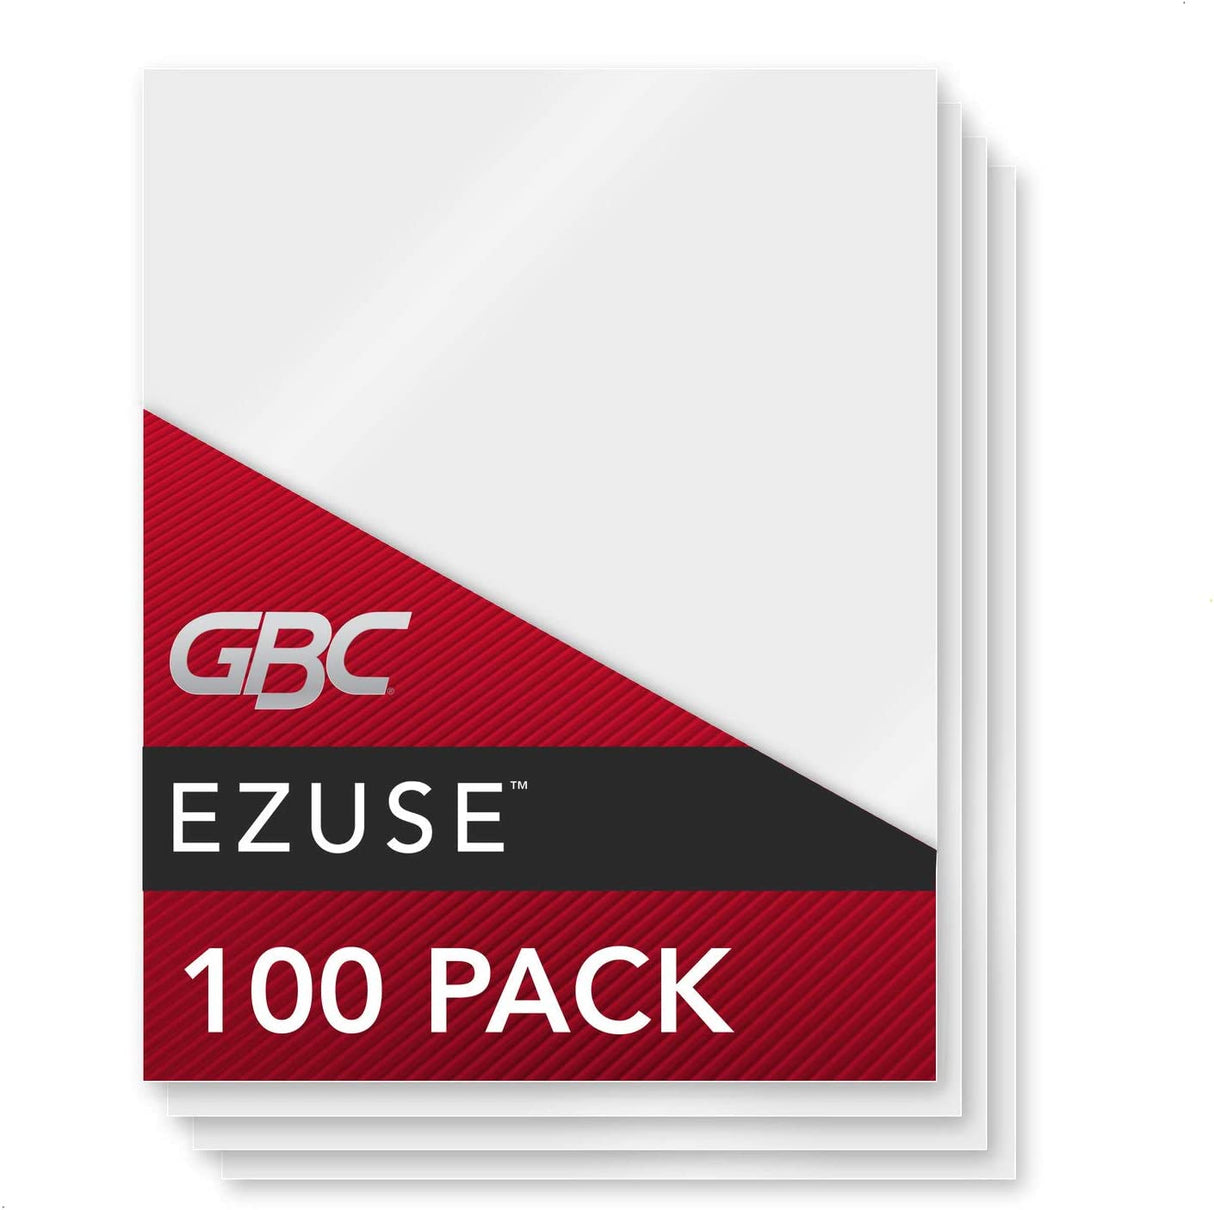 GBC Thermal Laminating Sheets / Pouches, Legal Size, 5 Mil, EZUse, 100-Count (3740473) 100/Pack 5 mil - Legal